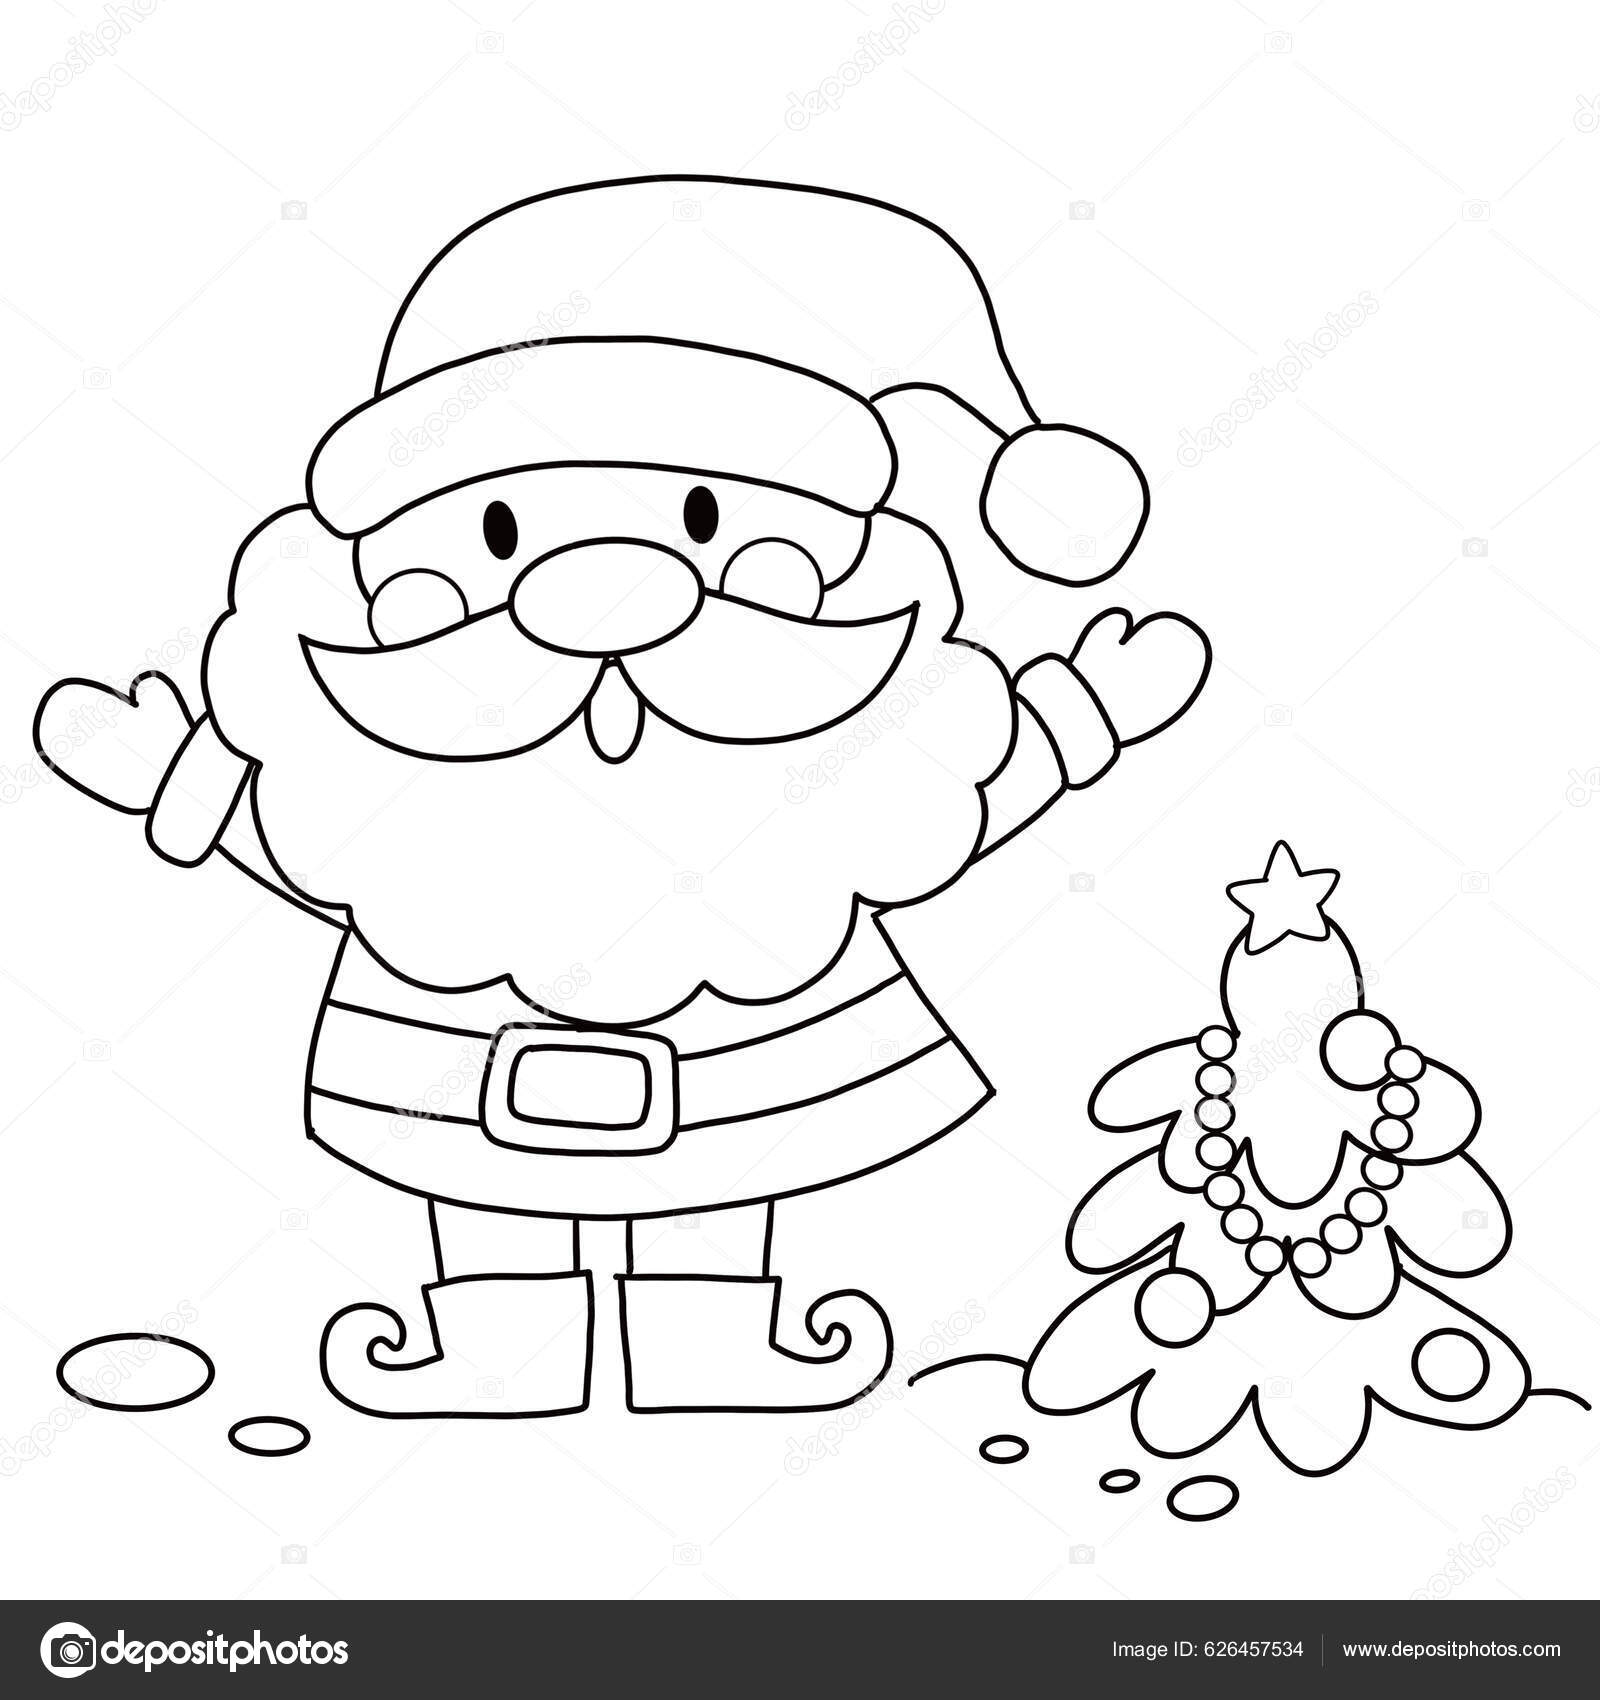 How To Draw Santa Claus's Face - Art For Kids Hub -